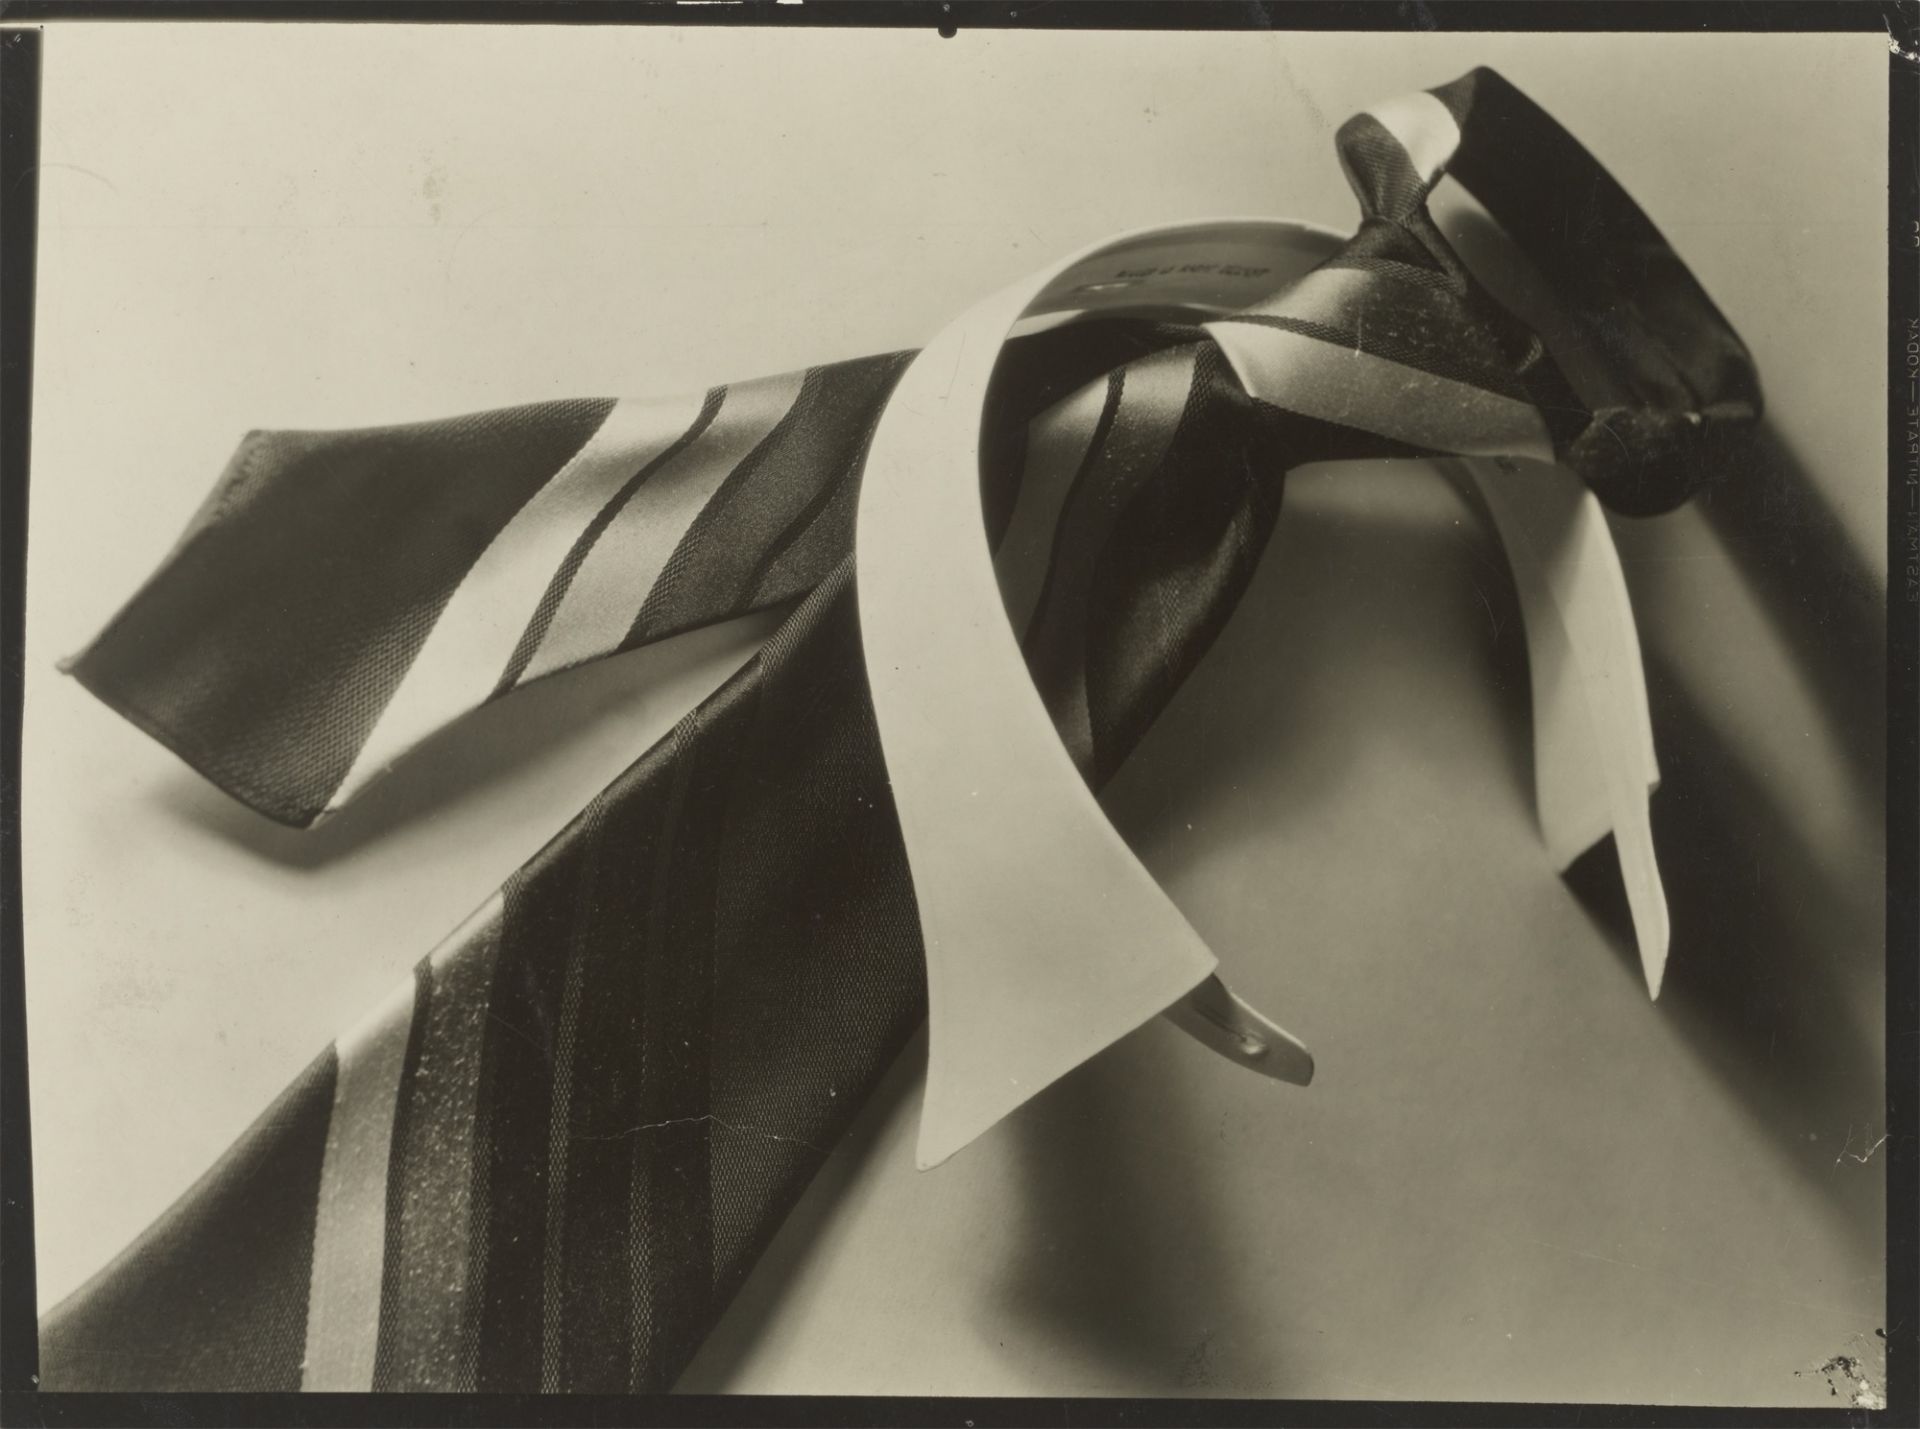 Théodore Blanc & Antoine Demilly. Still Life with Tie and Collar. Circa 1930